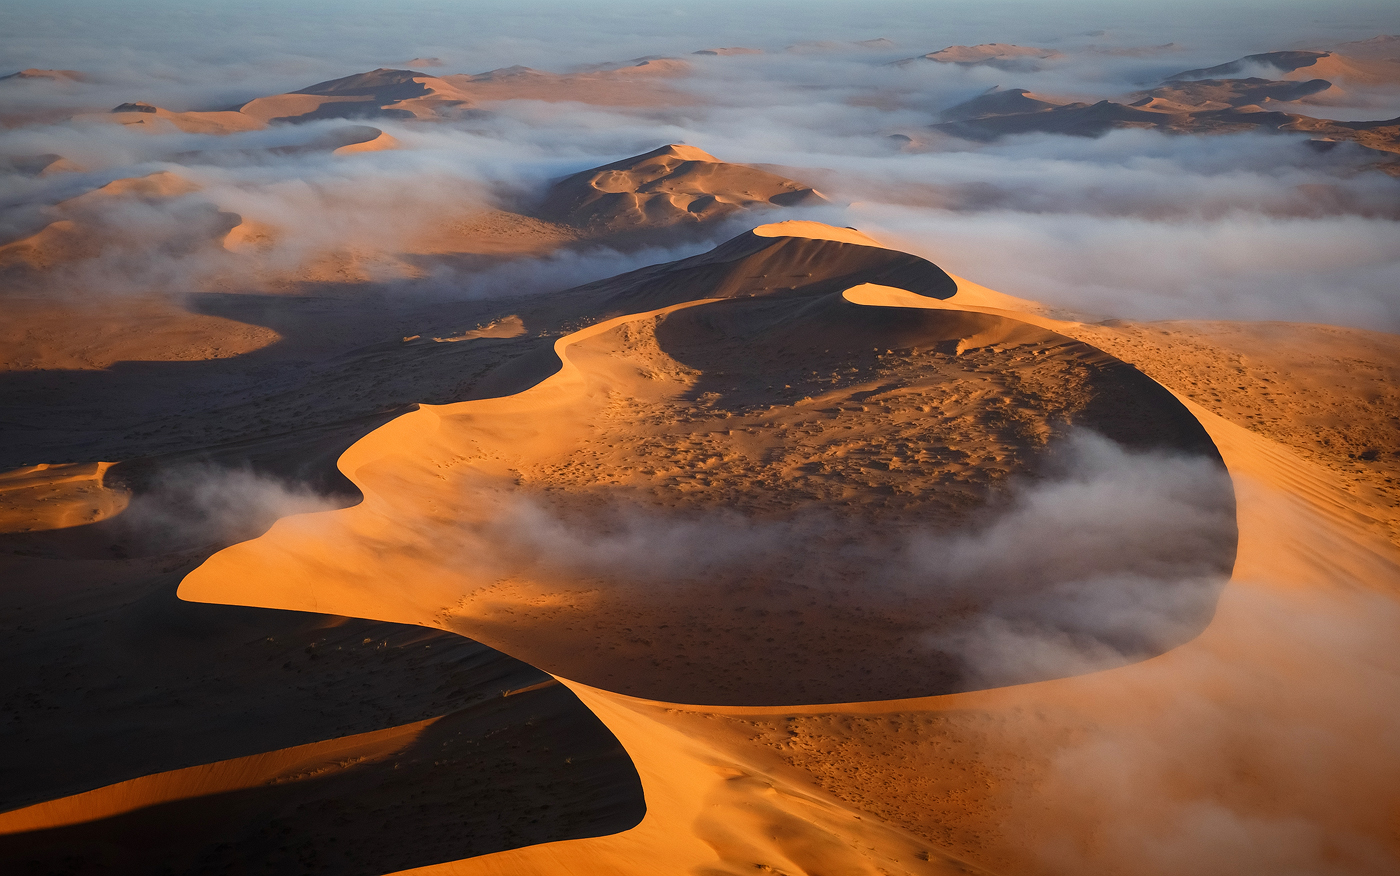 The Namib Desert is extremely vast, and taking a helicopter flight into the dune fields can expose beautiful and diverse subject matter. A bit of fog doesn't hurt, either!  <br>Canon EOS 5D Mark III, Tamron 24–70mm f/2.8, 1/1250 sec, f/10, ISO800 <br>Sossusvlei, Namibia